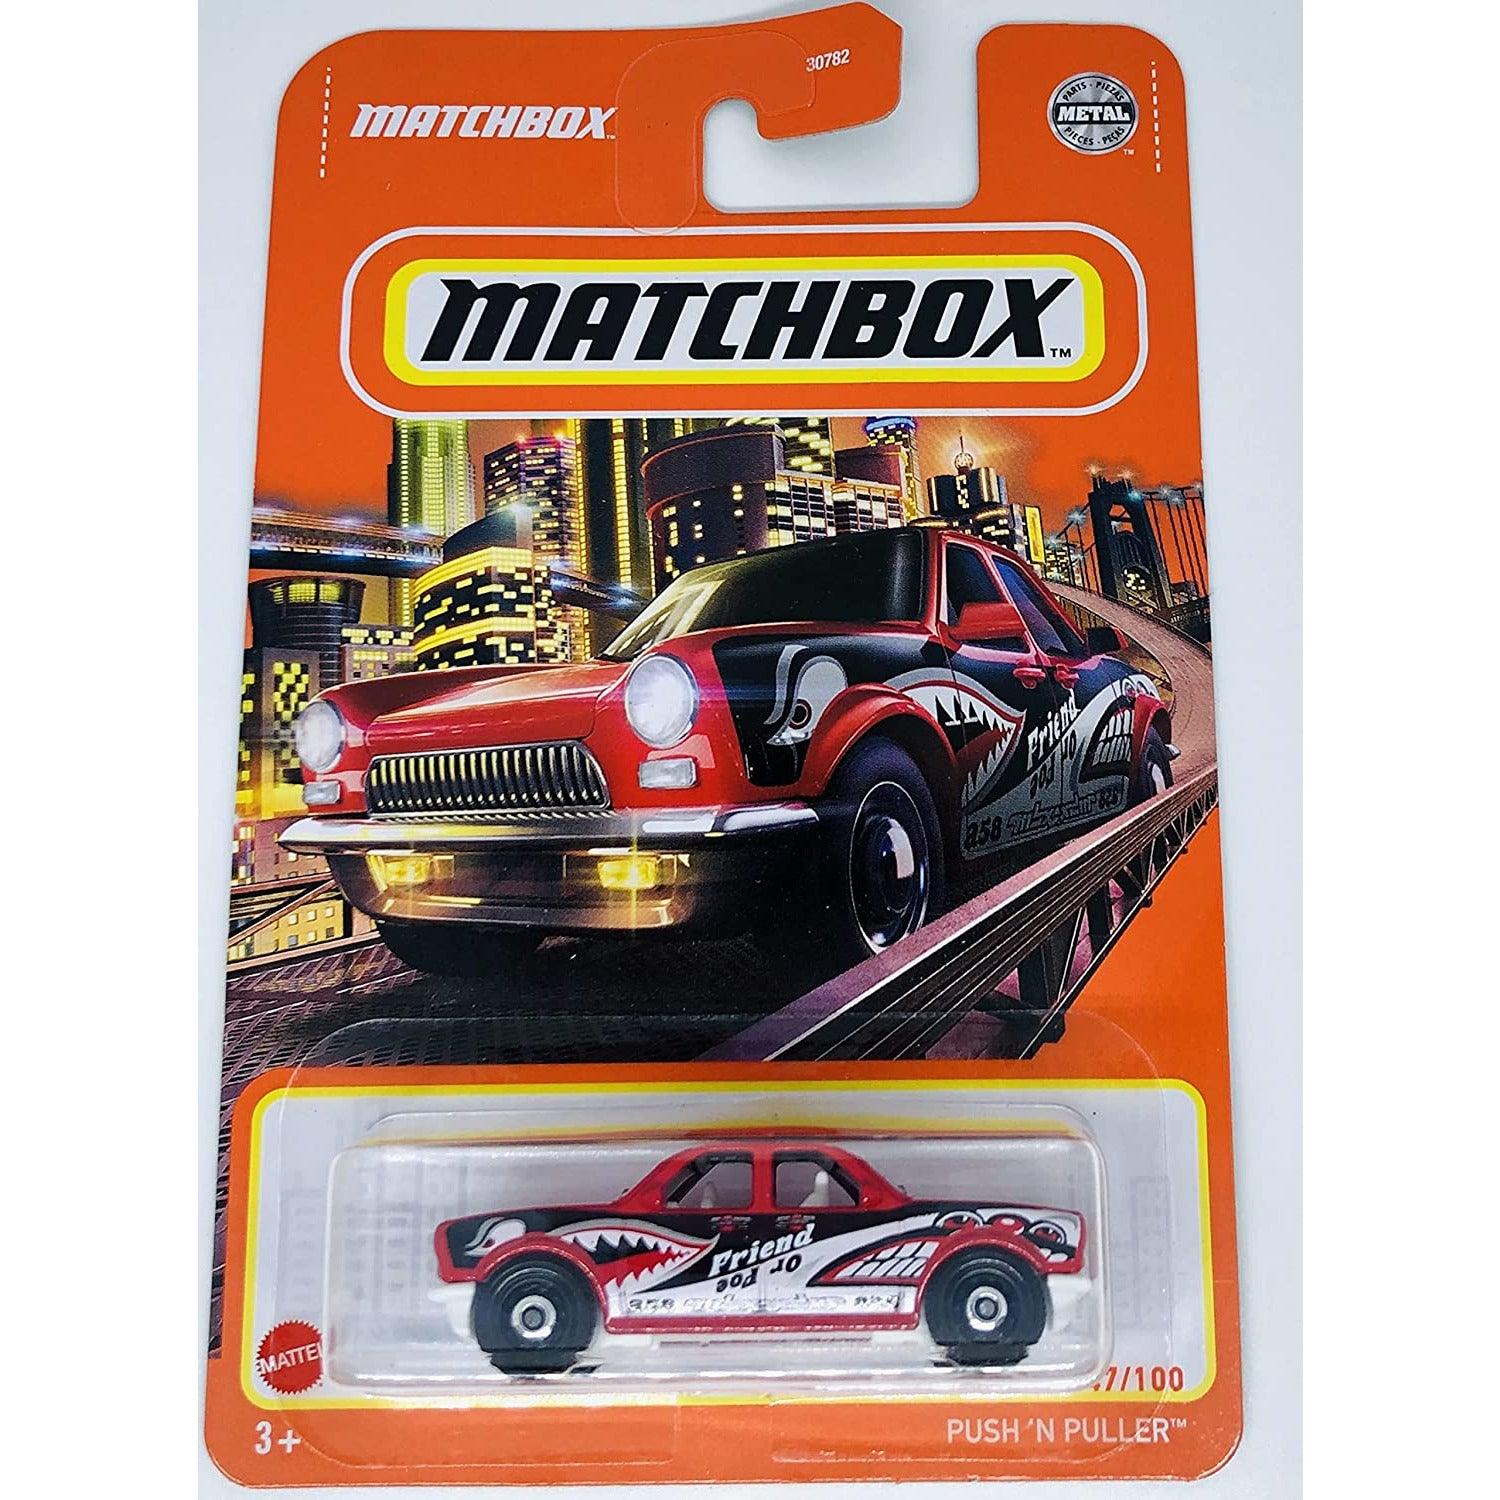 MatchBox Die Cast 1:64 Scale Vehicle - Push 'N Puller - BumbleToys - 2-4 Years, 5-7 Years, Boys, Collectible Vehicles, MatchBox